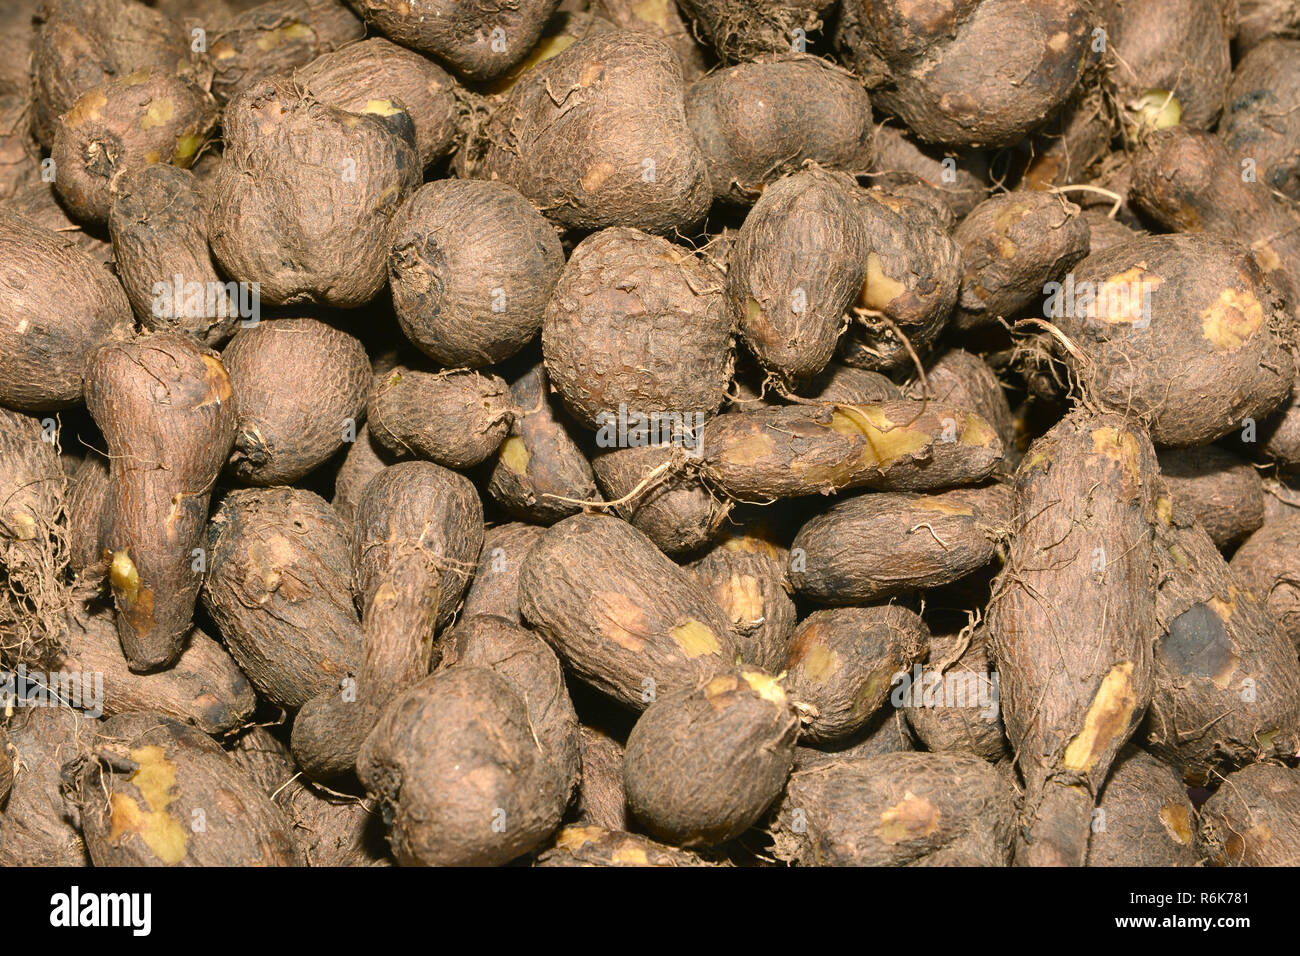 Native vegetable in the South of Thailand be similar to potatoes Stock Photo